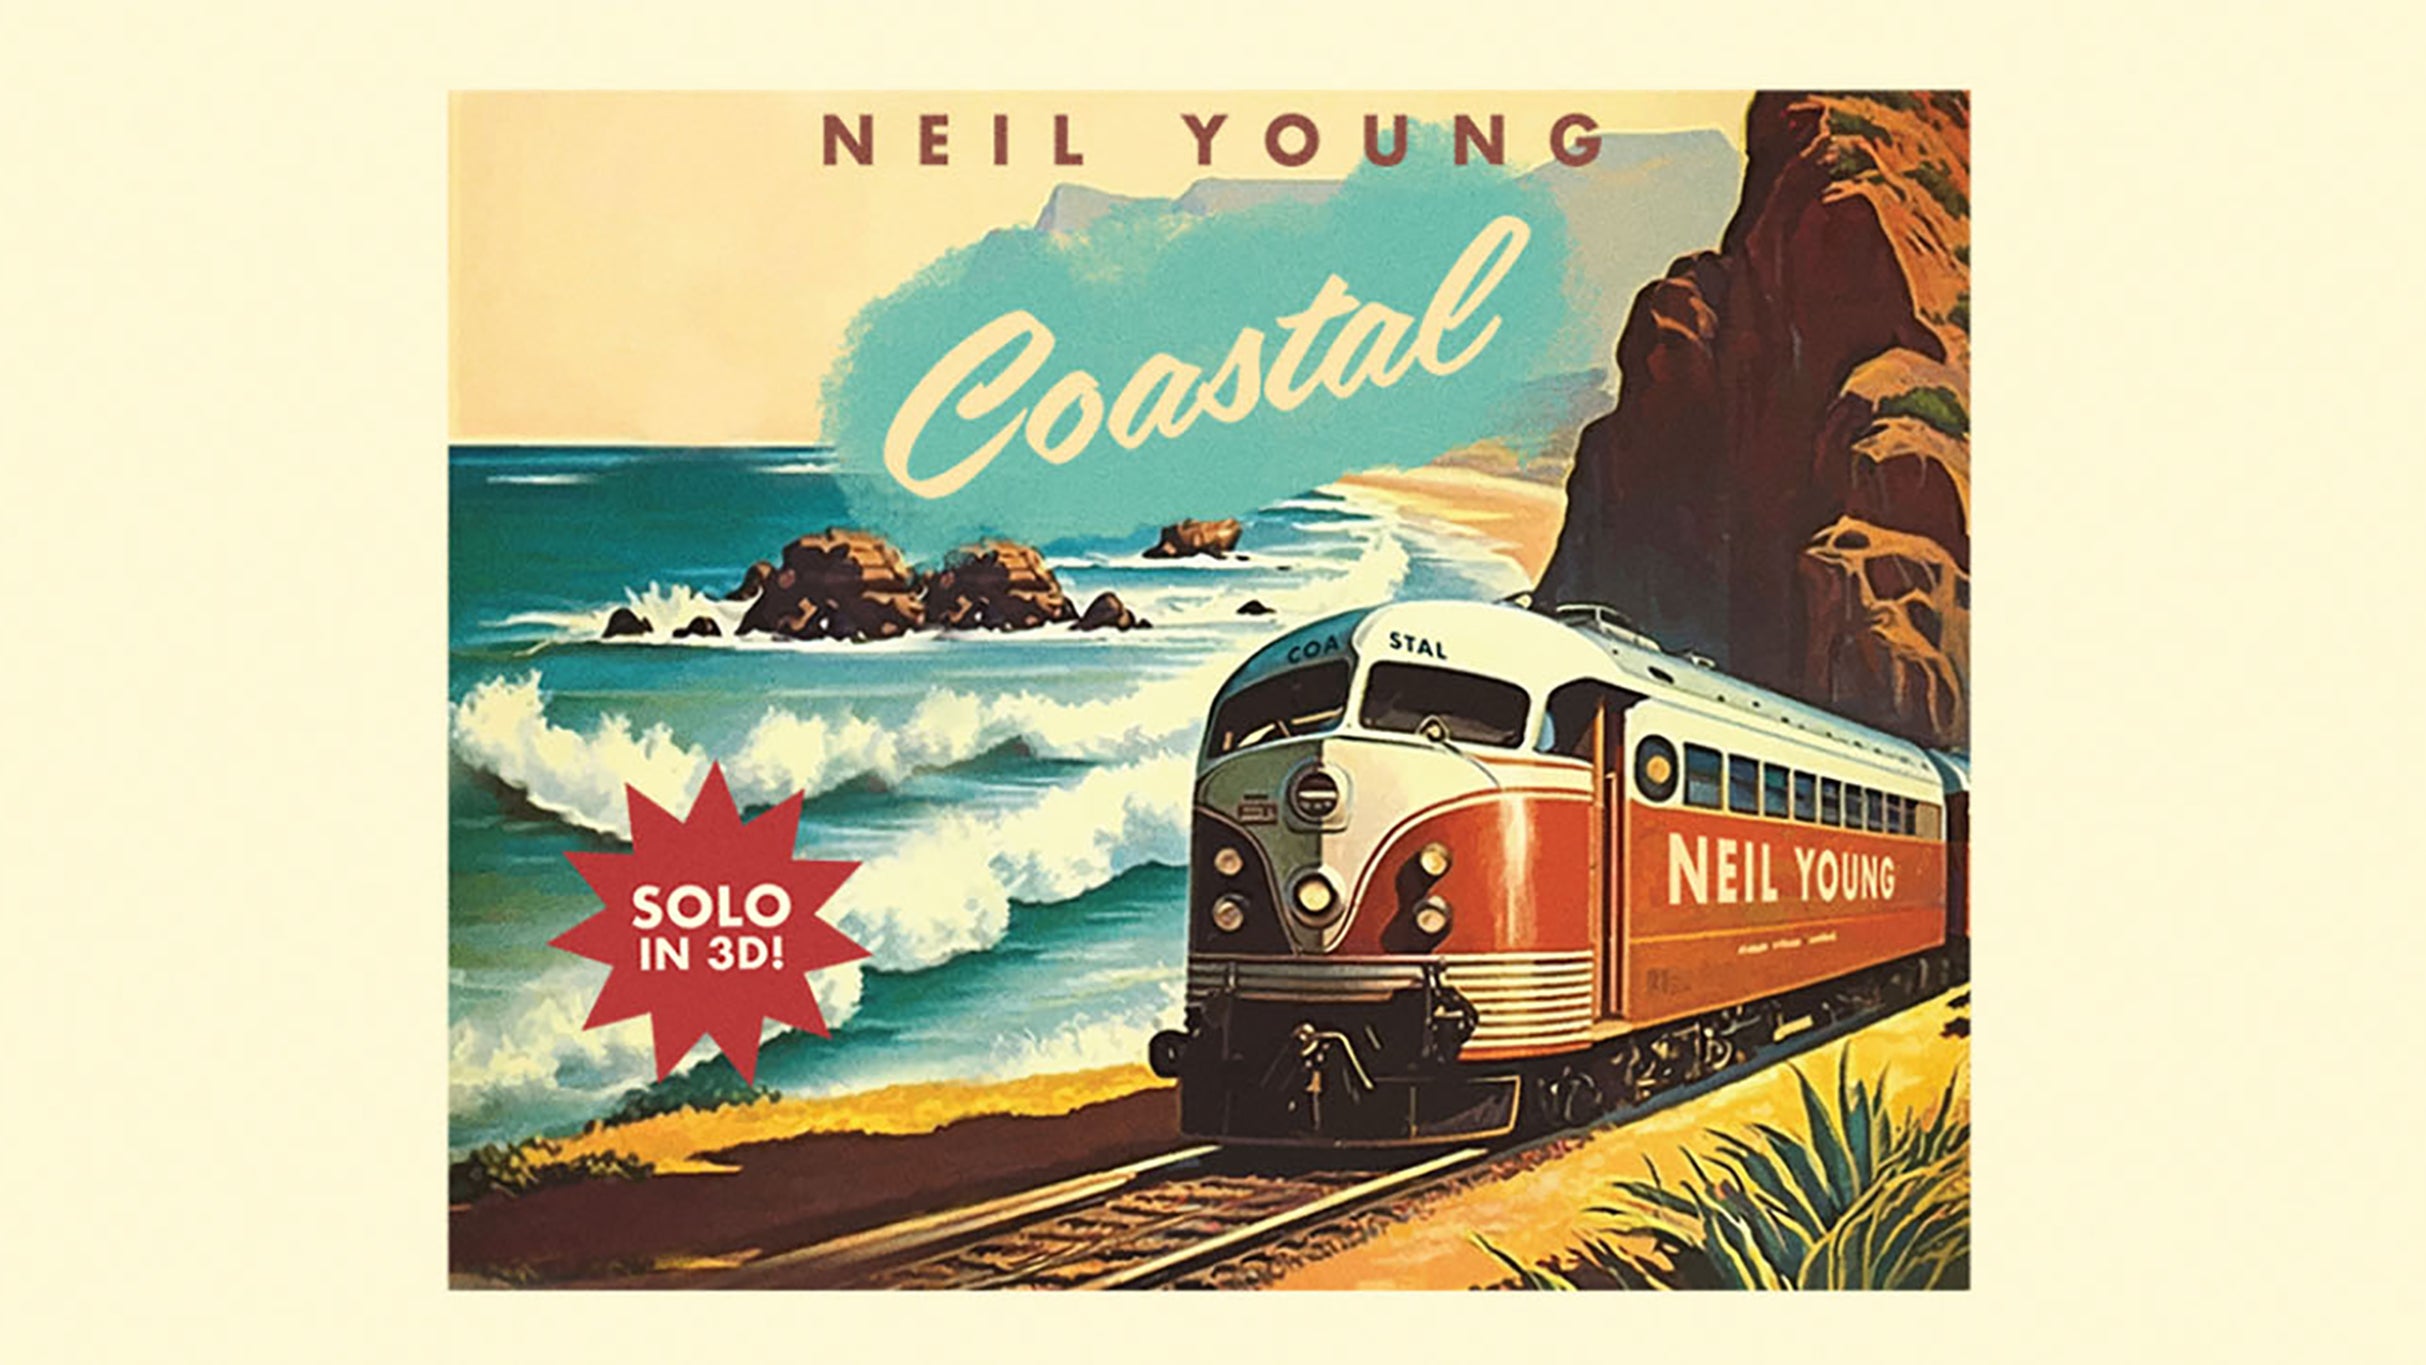 Neil Young in Los Angeles promo photo for Greek presale offer code